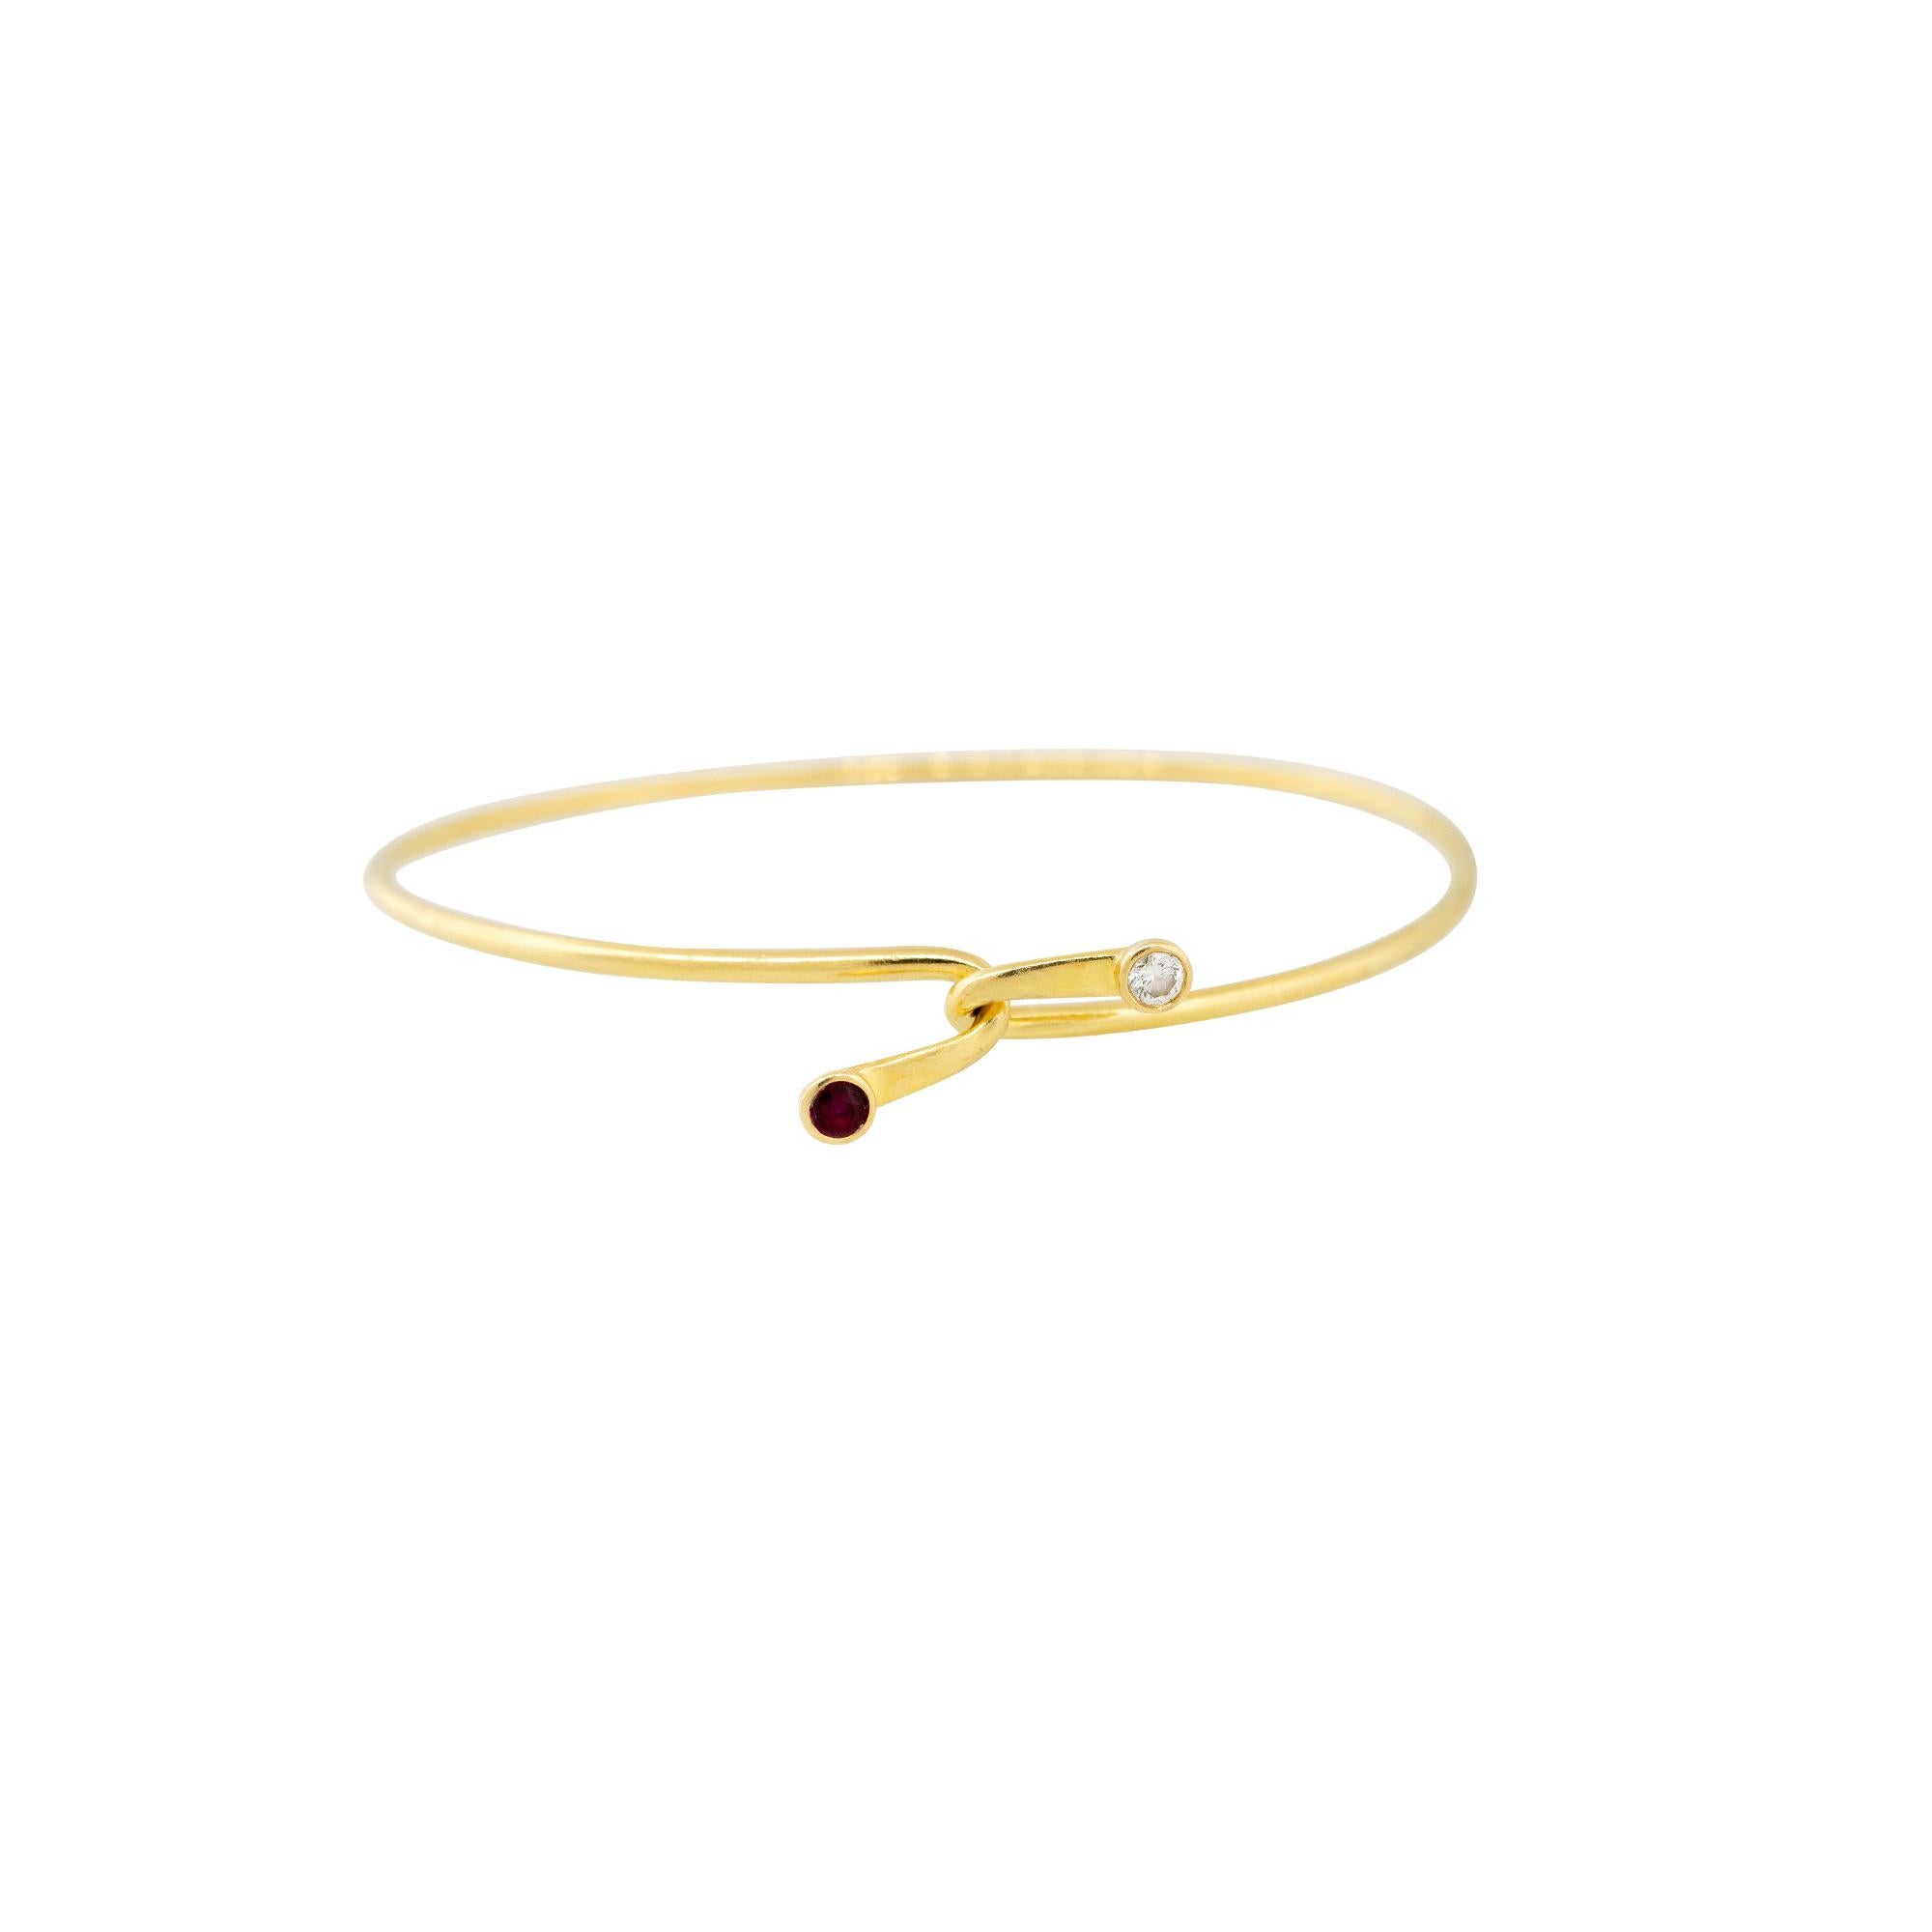 Tiffany & Co. 14k Yellow Gold Ruby and Diamond Twist Lock Narrow Bracelet
Brand: Tiffany & Co.
Material: 14k Yellow Gold
Diamond/Gemstone Details: The diamond is approximately 0.06 carats and is a Round Brilliant cut. The diamond is approximately